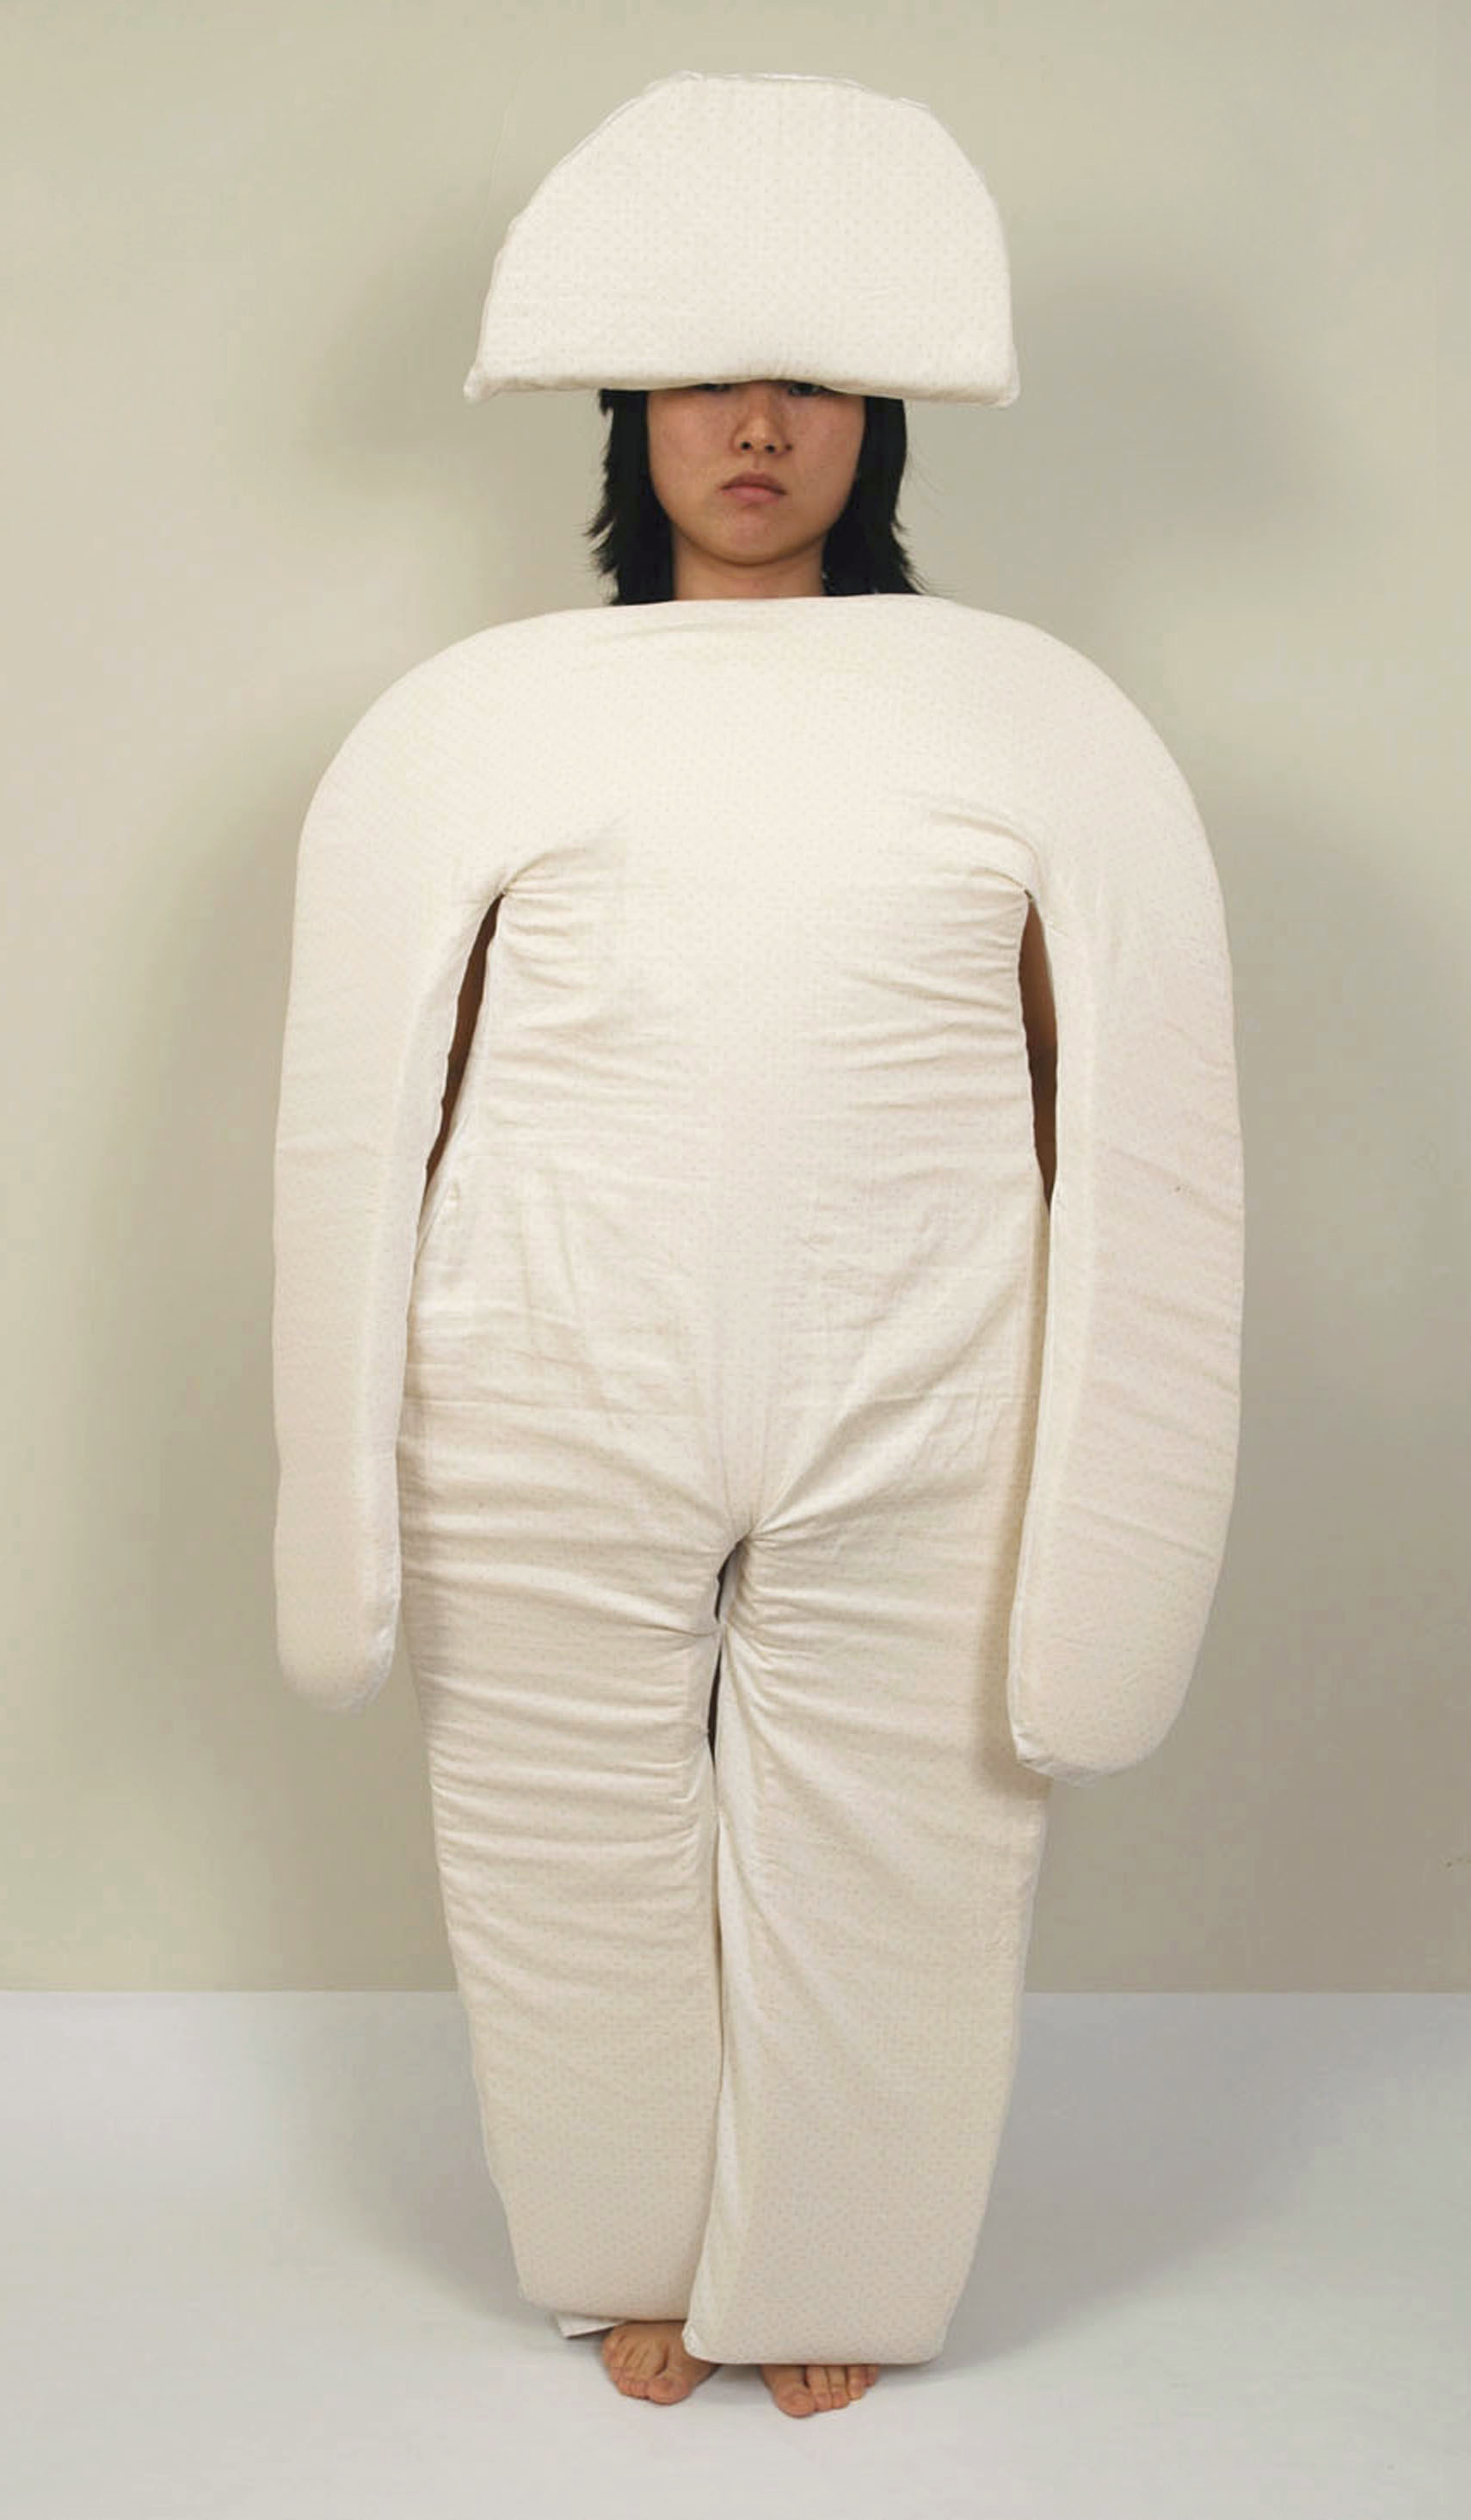 A woman wears the padding that would rest in the vertical bed: a series of cushions like an oversized set of pajamas, made to nest into the grooves and curves of the bed.